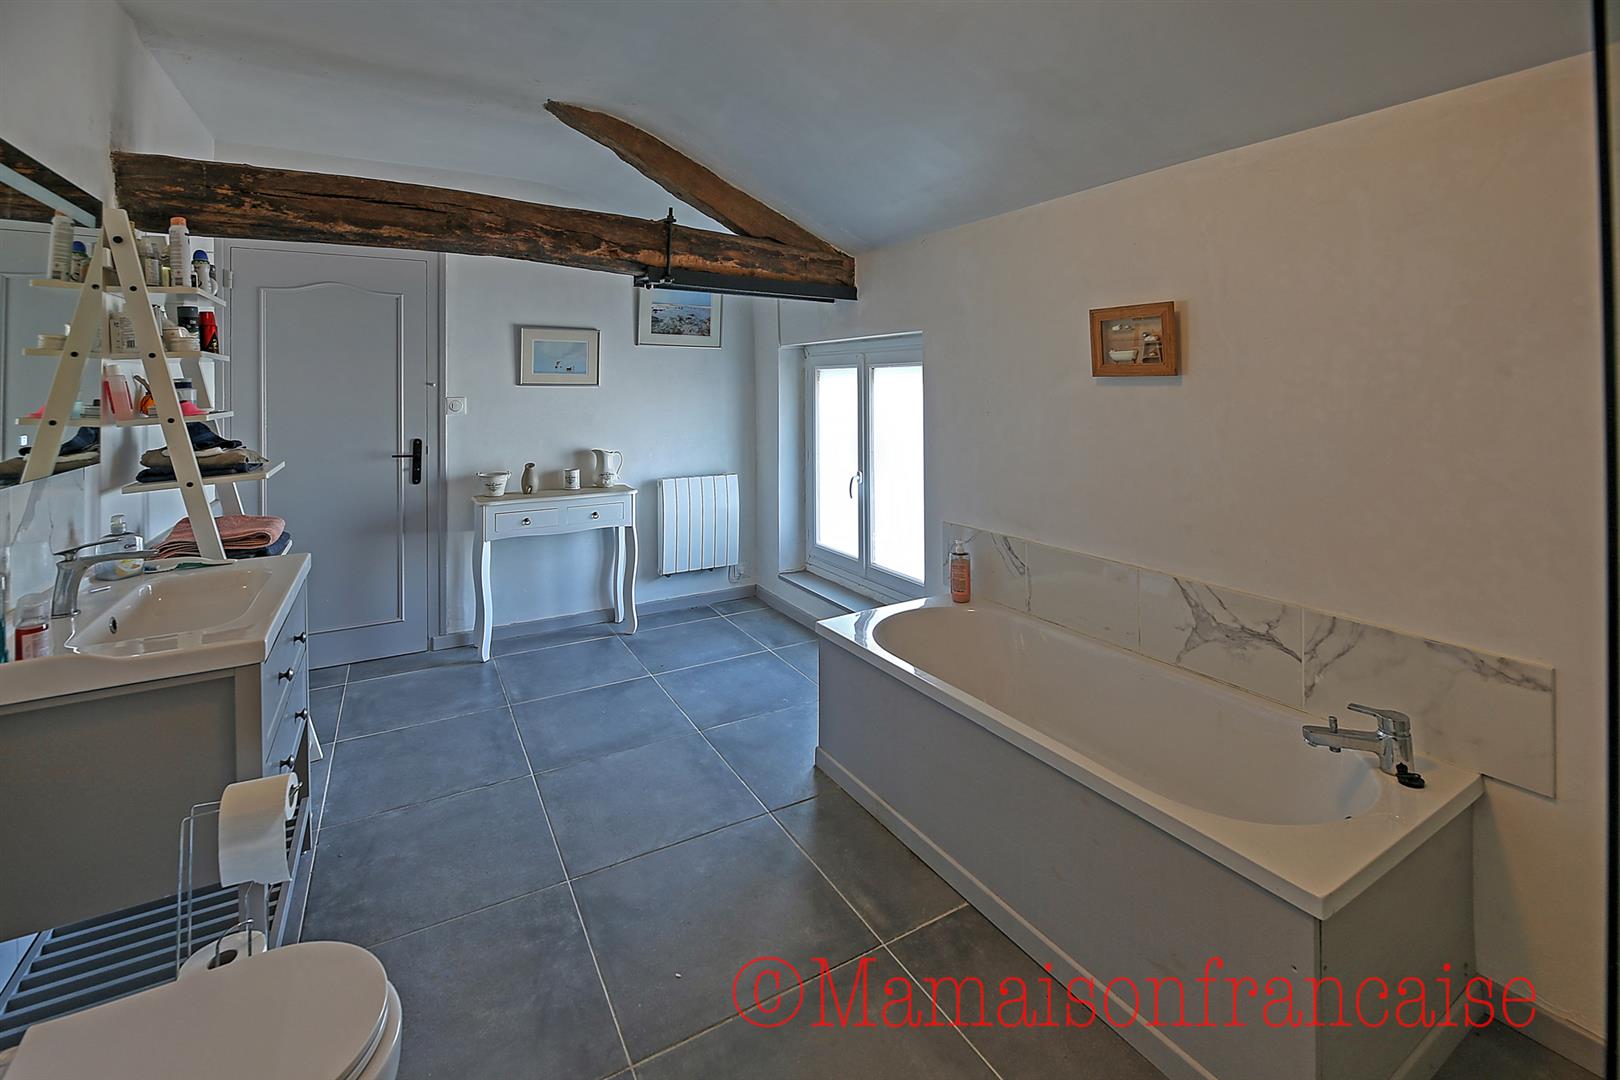 Renovated 3bed/3bath stone property with eco heating & pool